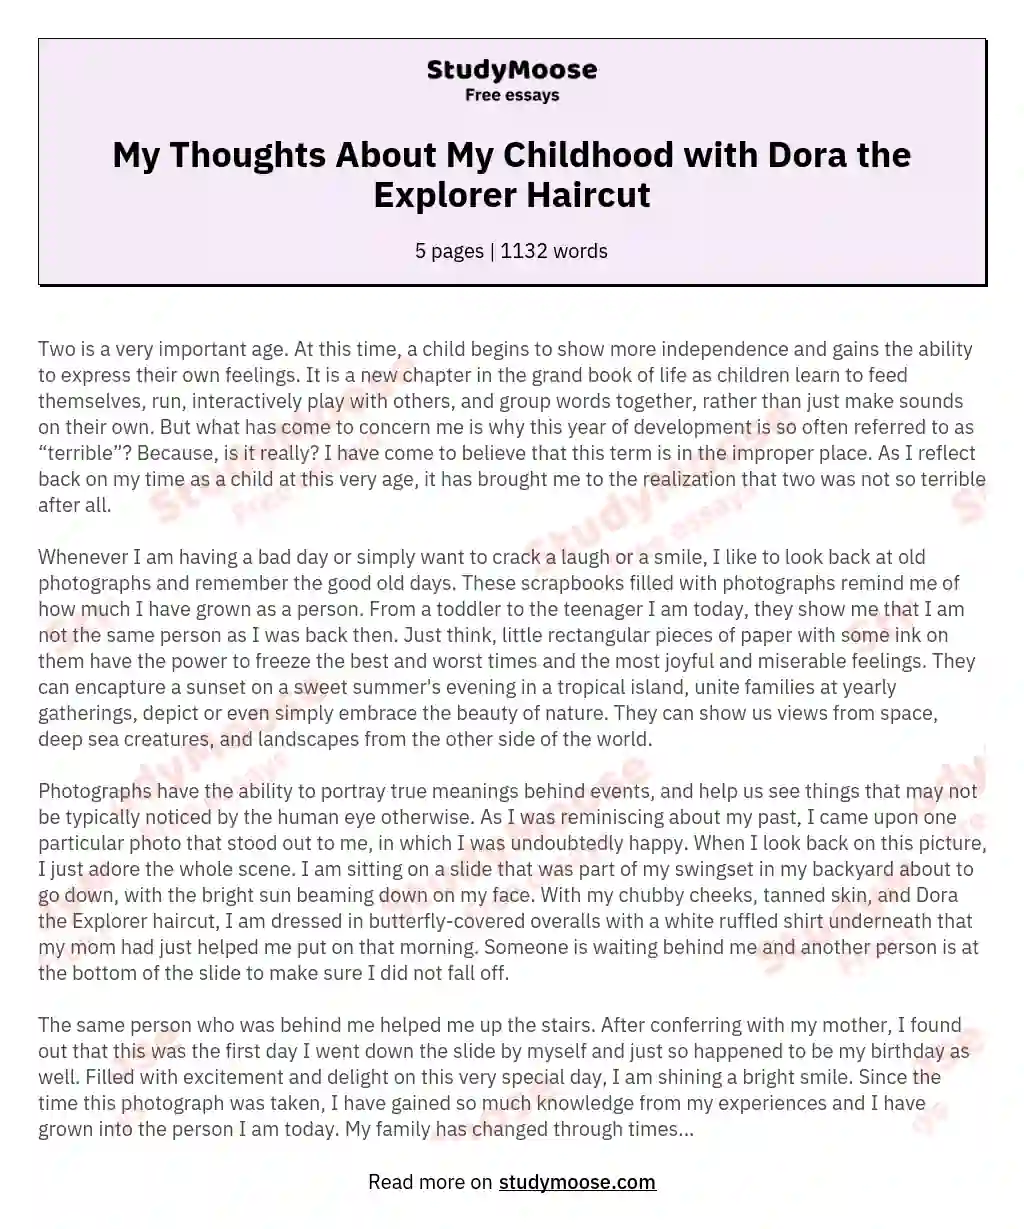 My Thoughts About My Childhood with Dora the Explorer Haircut essay